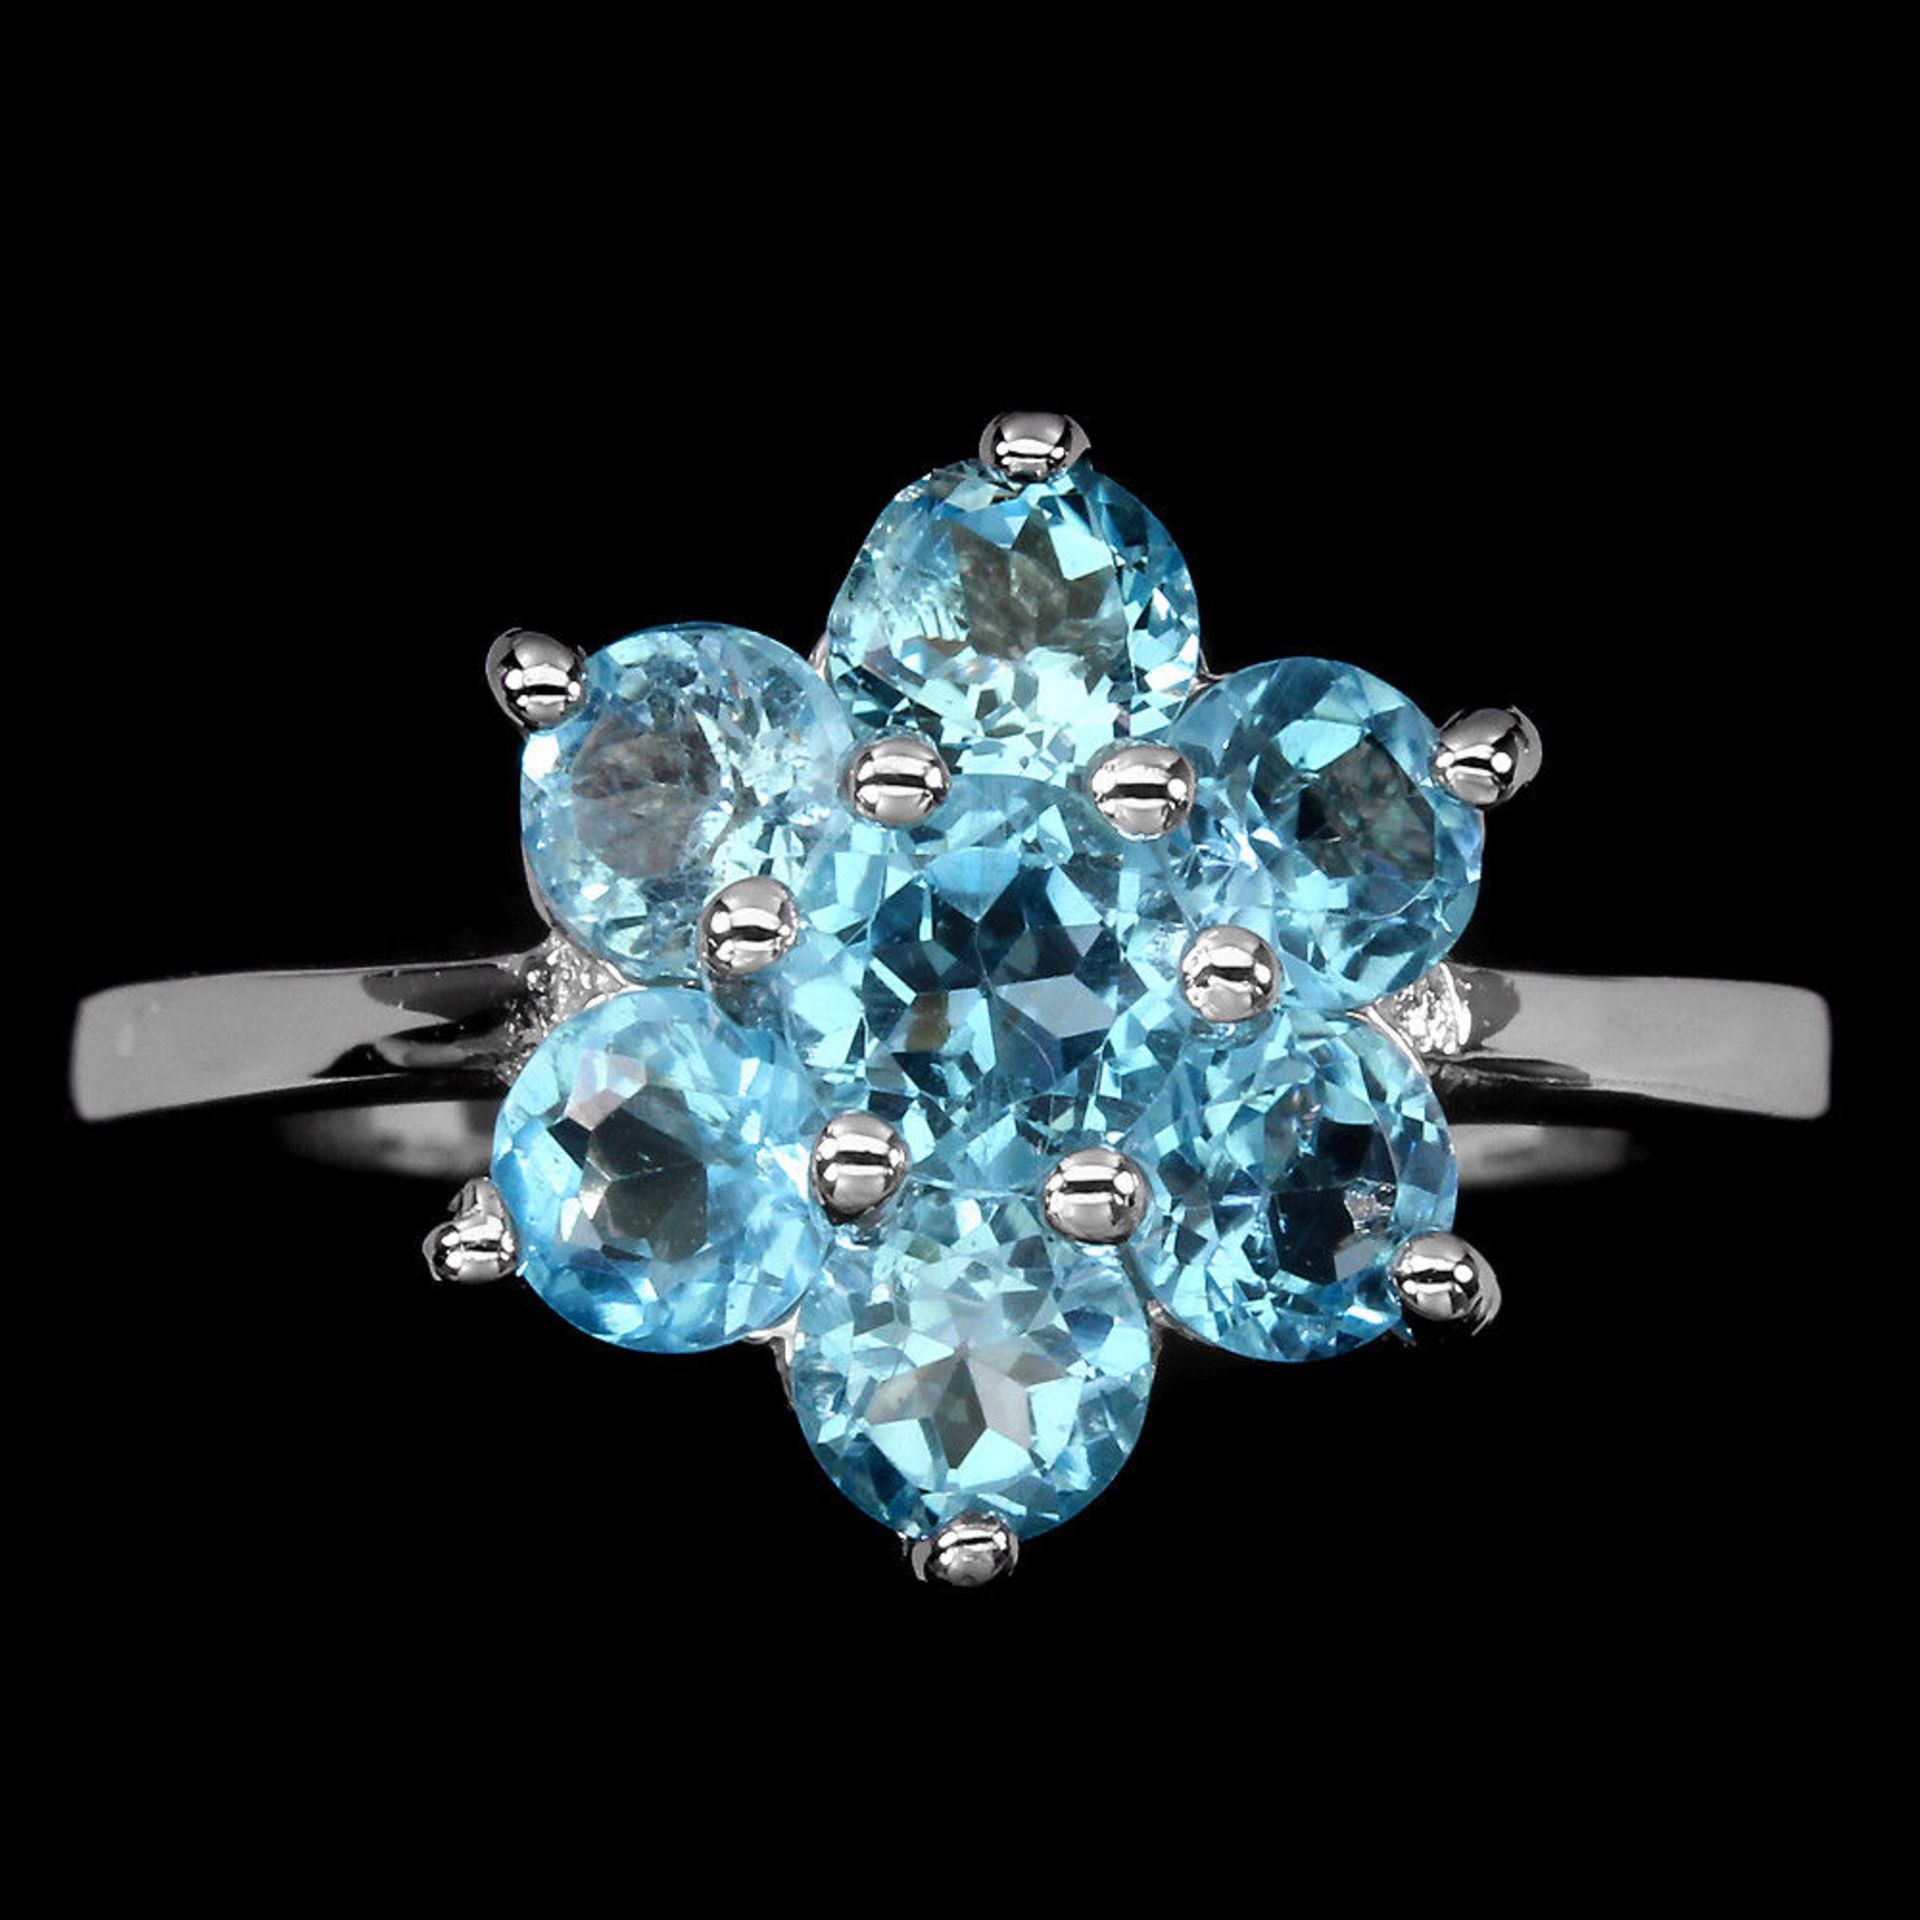 A Beautiful Natural Swiss Blue Topaz Ring, set with 7 Round cut African Blue Topaz - Size M.